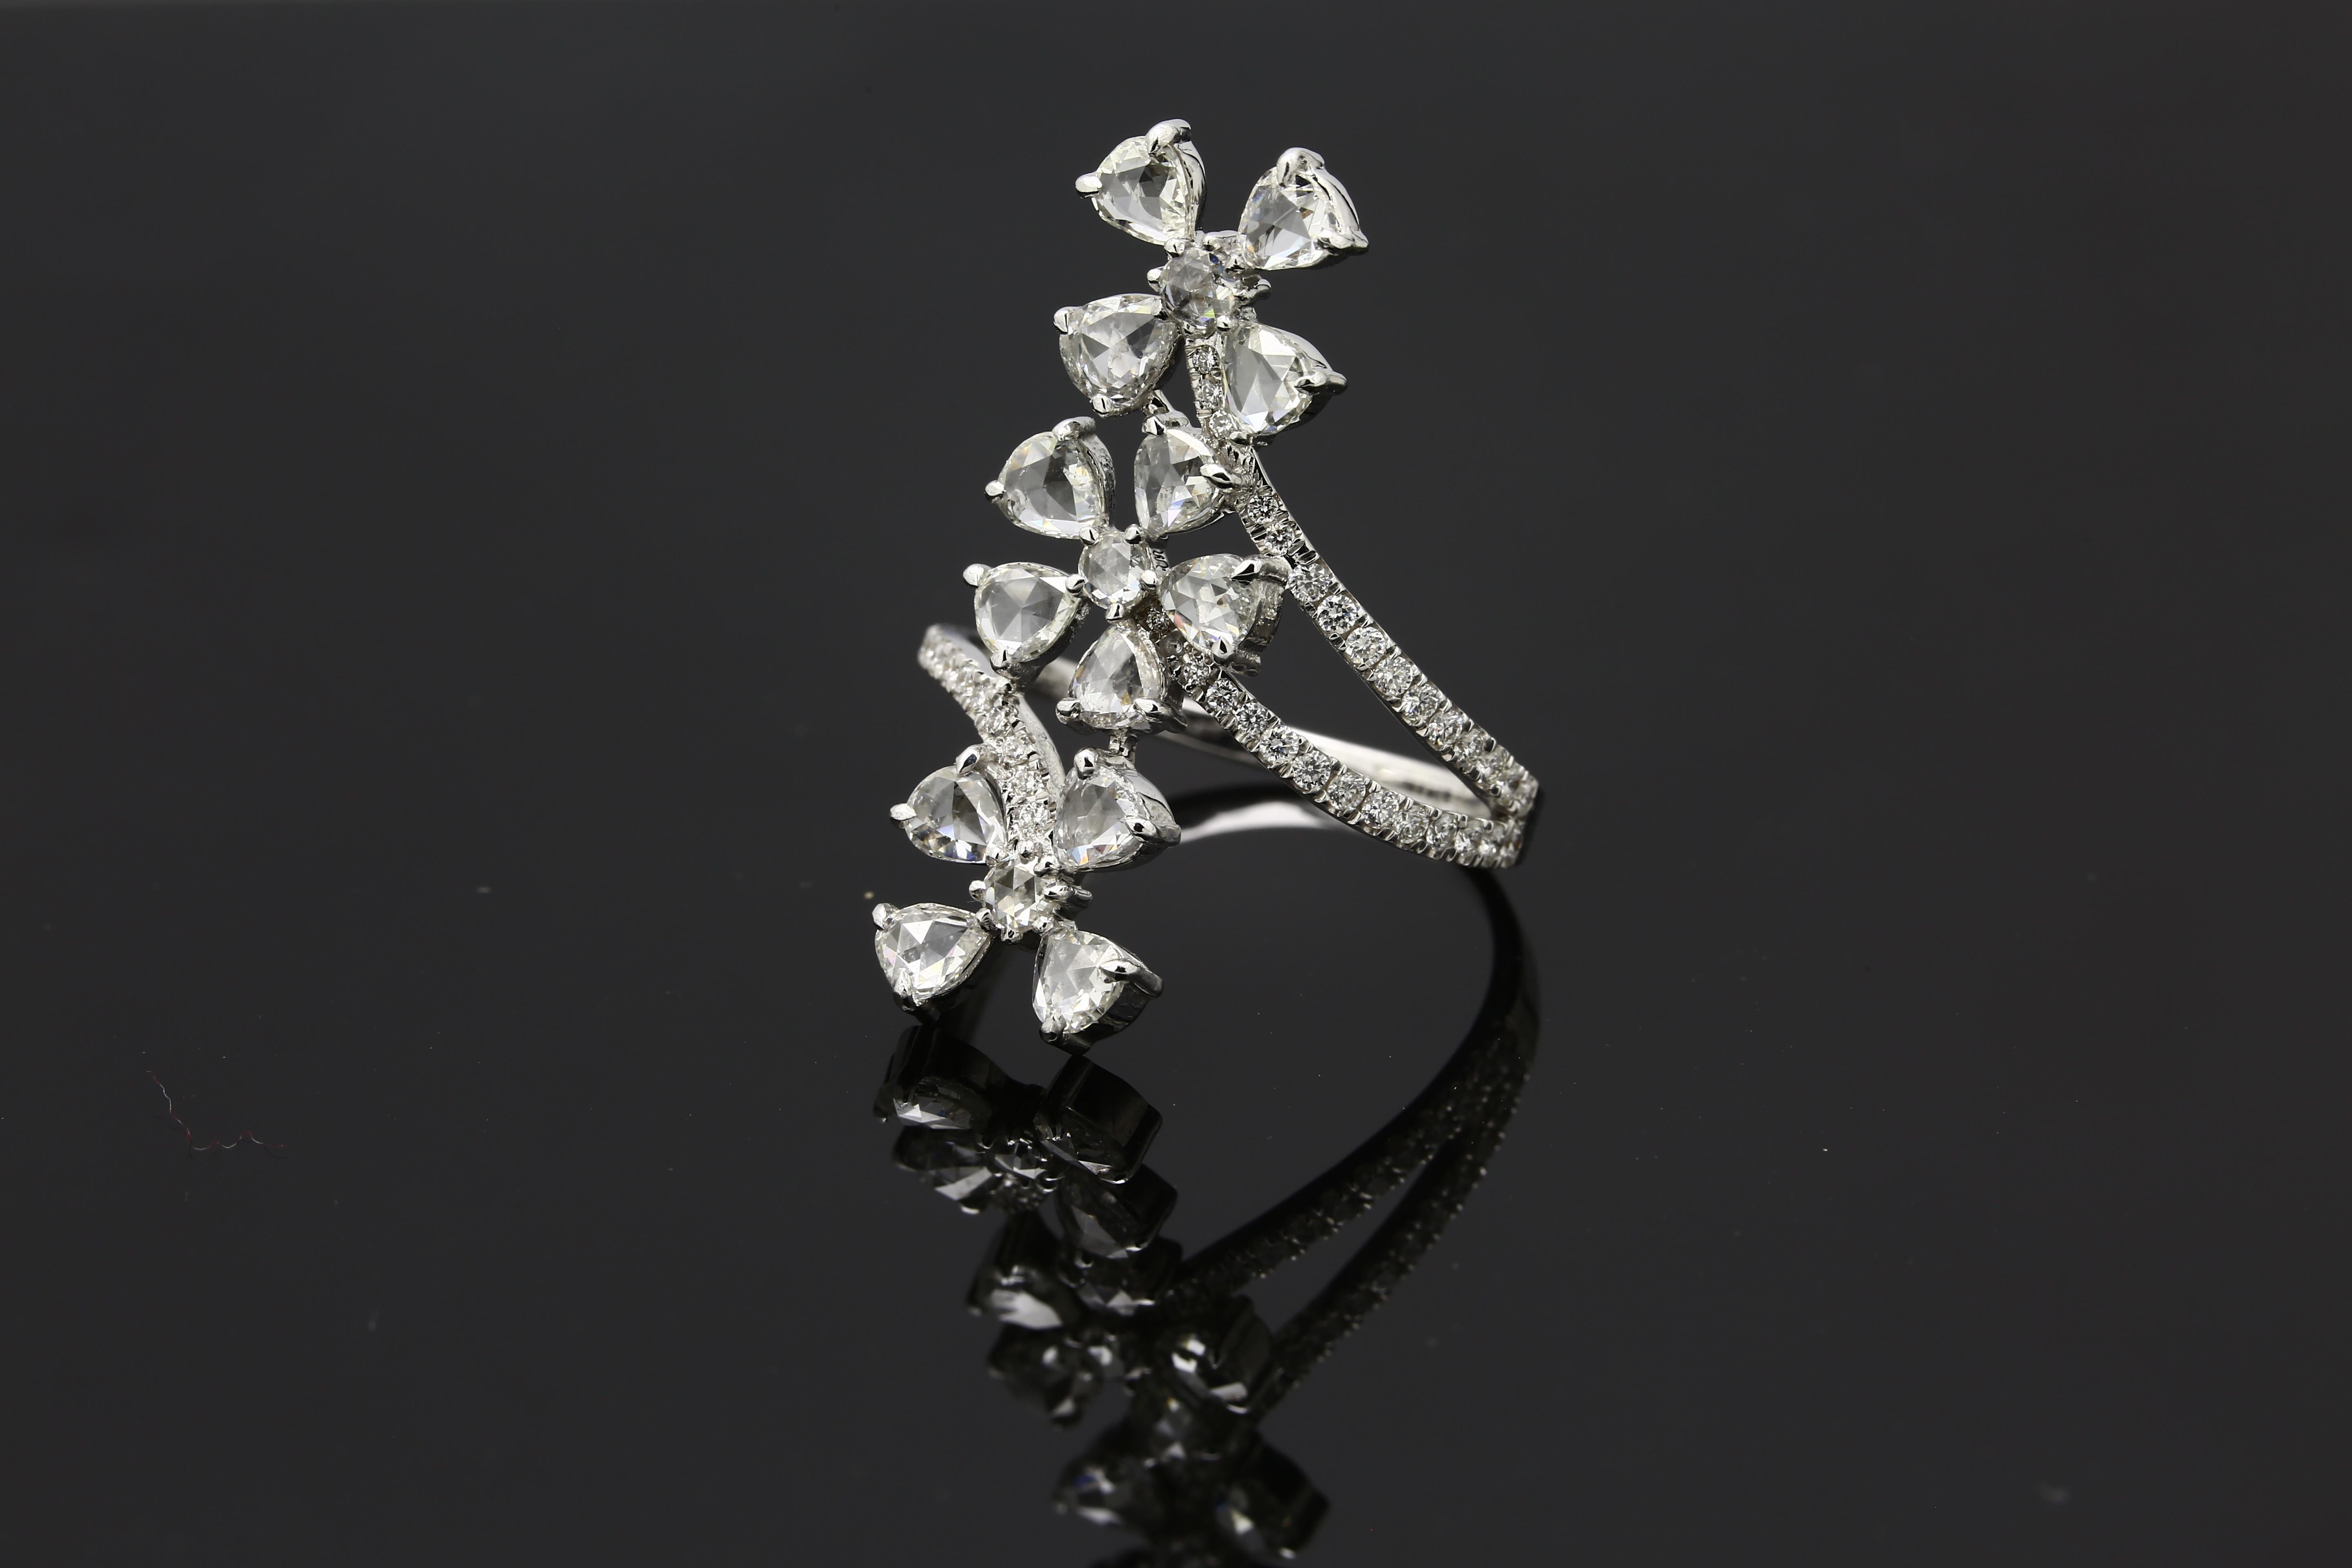 PANIM Trio Floral Diamond Rosecut Ring in 18K White Gold

Inspired by Nature,
Set in 18K White Gold with top quality Rosecuts shapes in Pear.

Colour FGH
Quality VVS/VS

Contact us on this platform to get more details